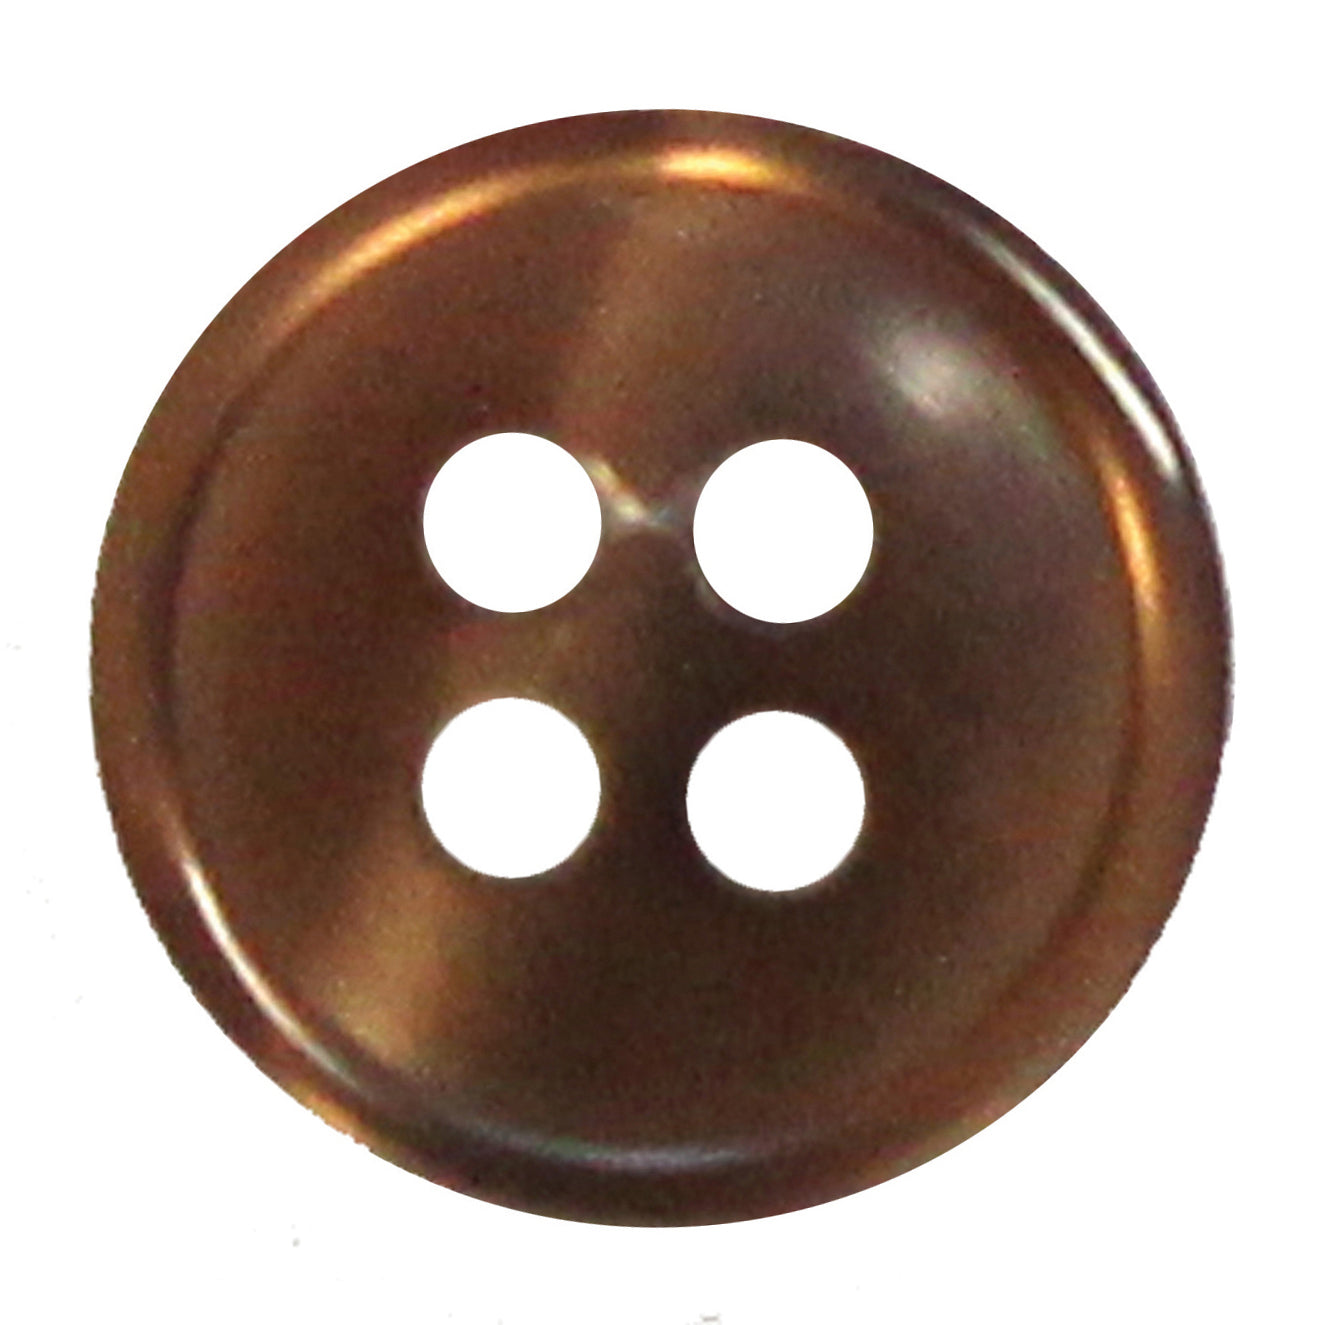 4 Hole Button - 13mm - Mid Brown [LG25.7]